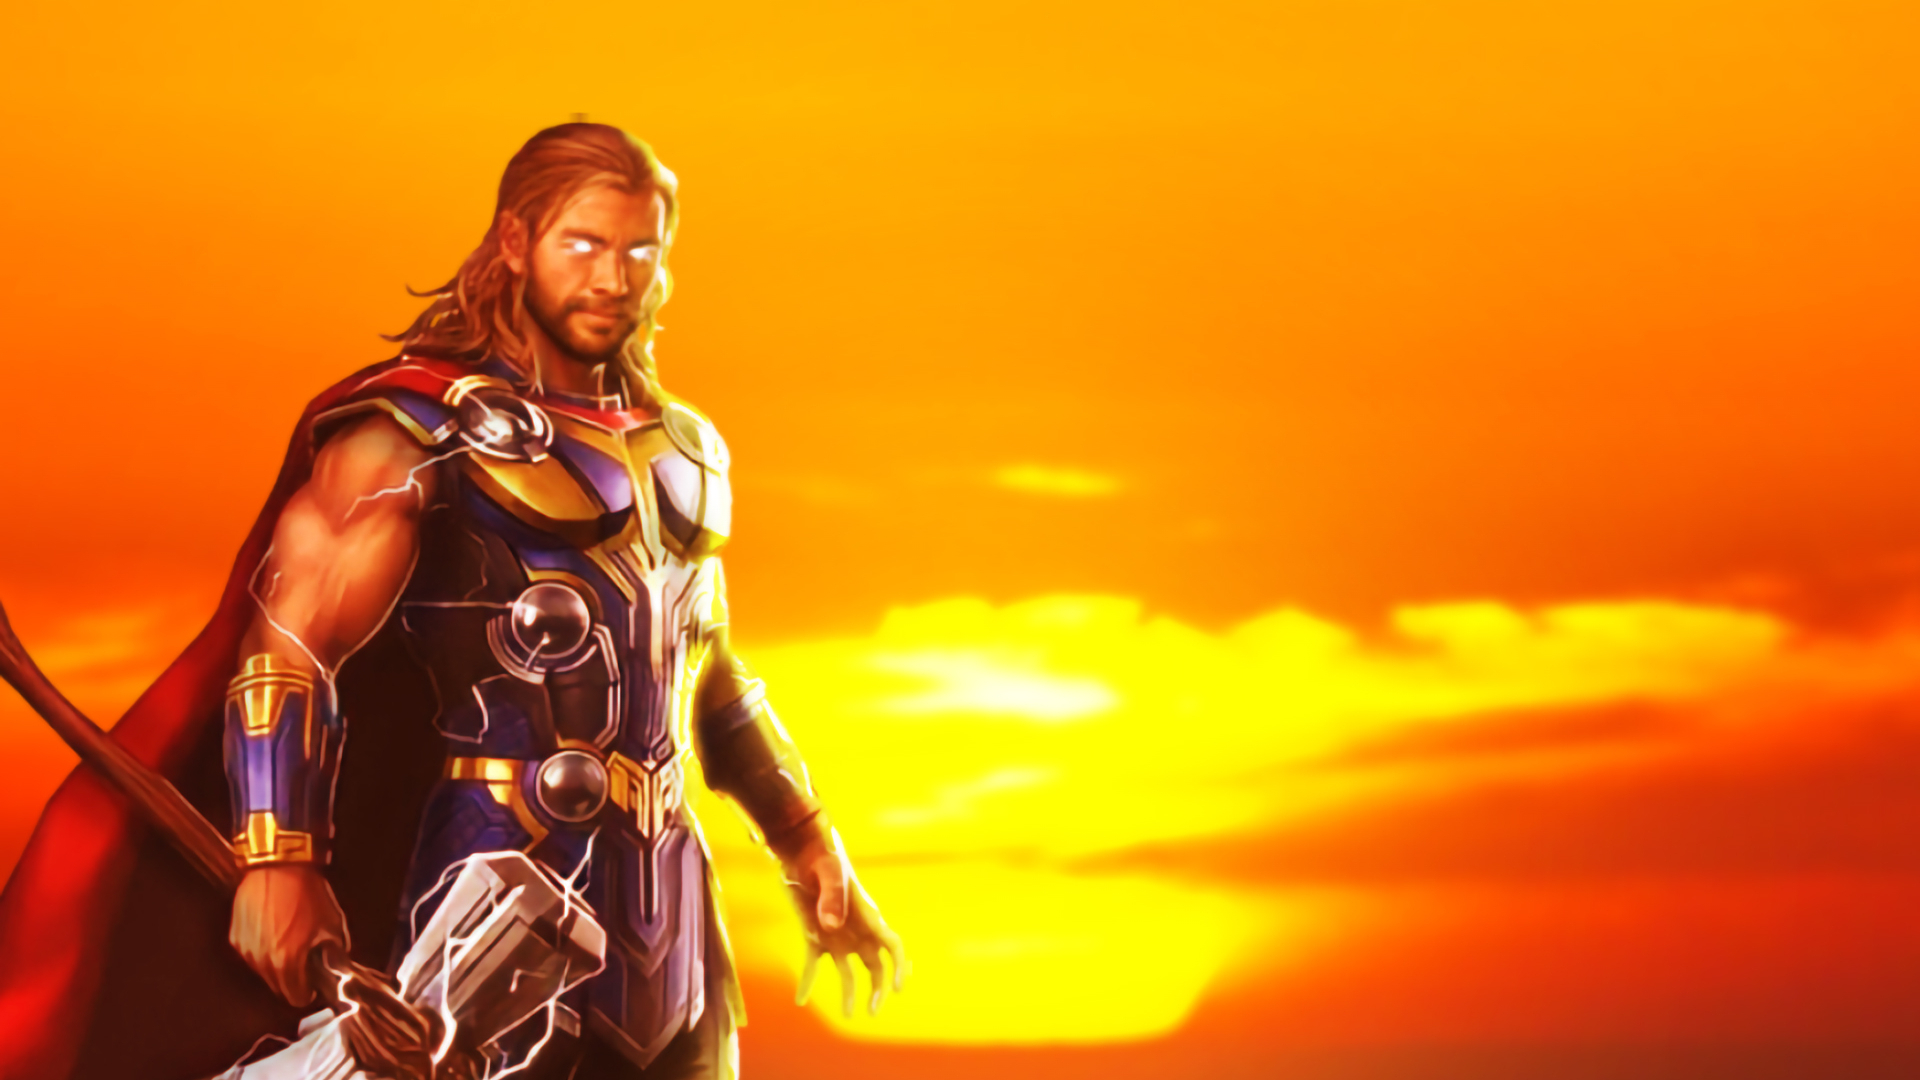 thor hd wallpapers 1080p